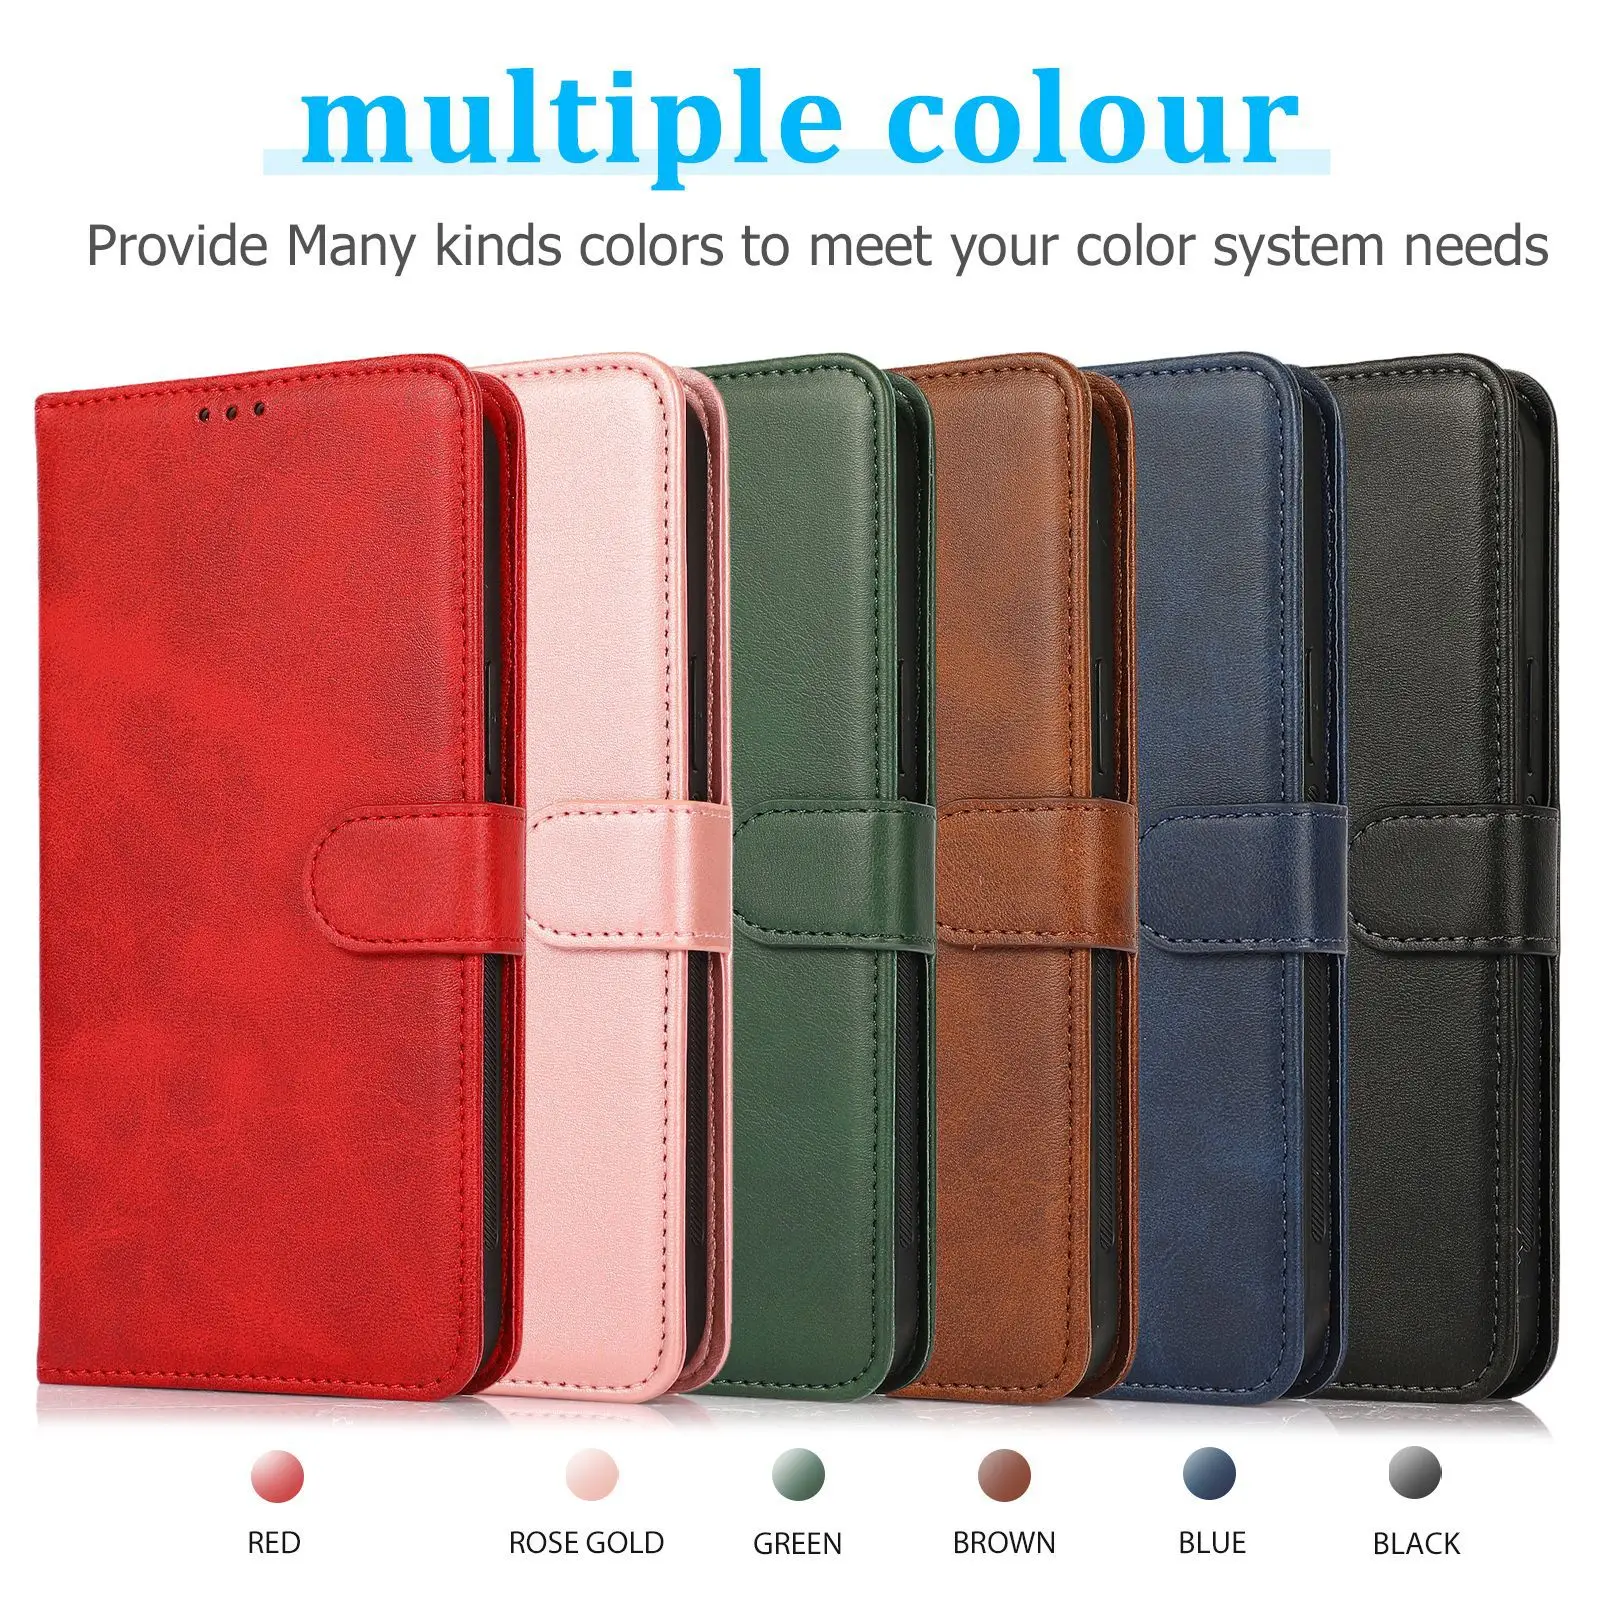 Luxury Leather Removable Case For iPhone 14 Pro MAX PLUS 11 12 13 Pro Max XR XS 6S 7 8P 8 Plus Flip Wallet Card Phone Bag Cover